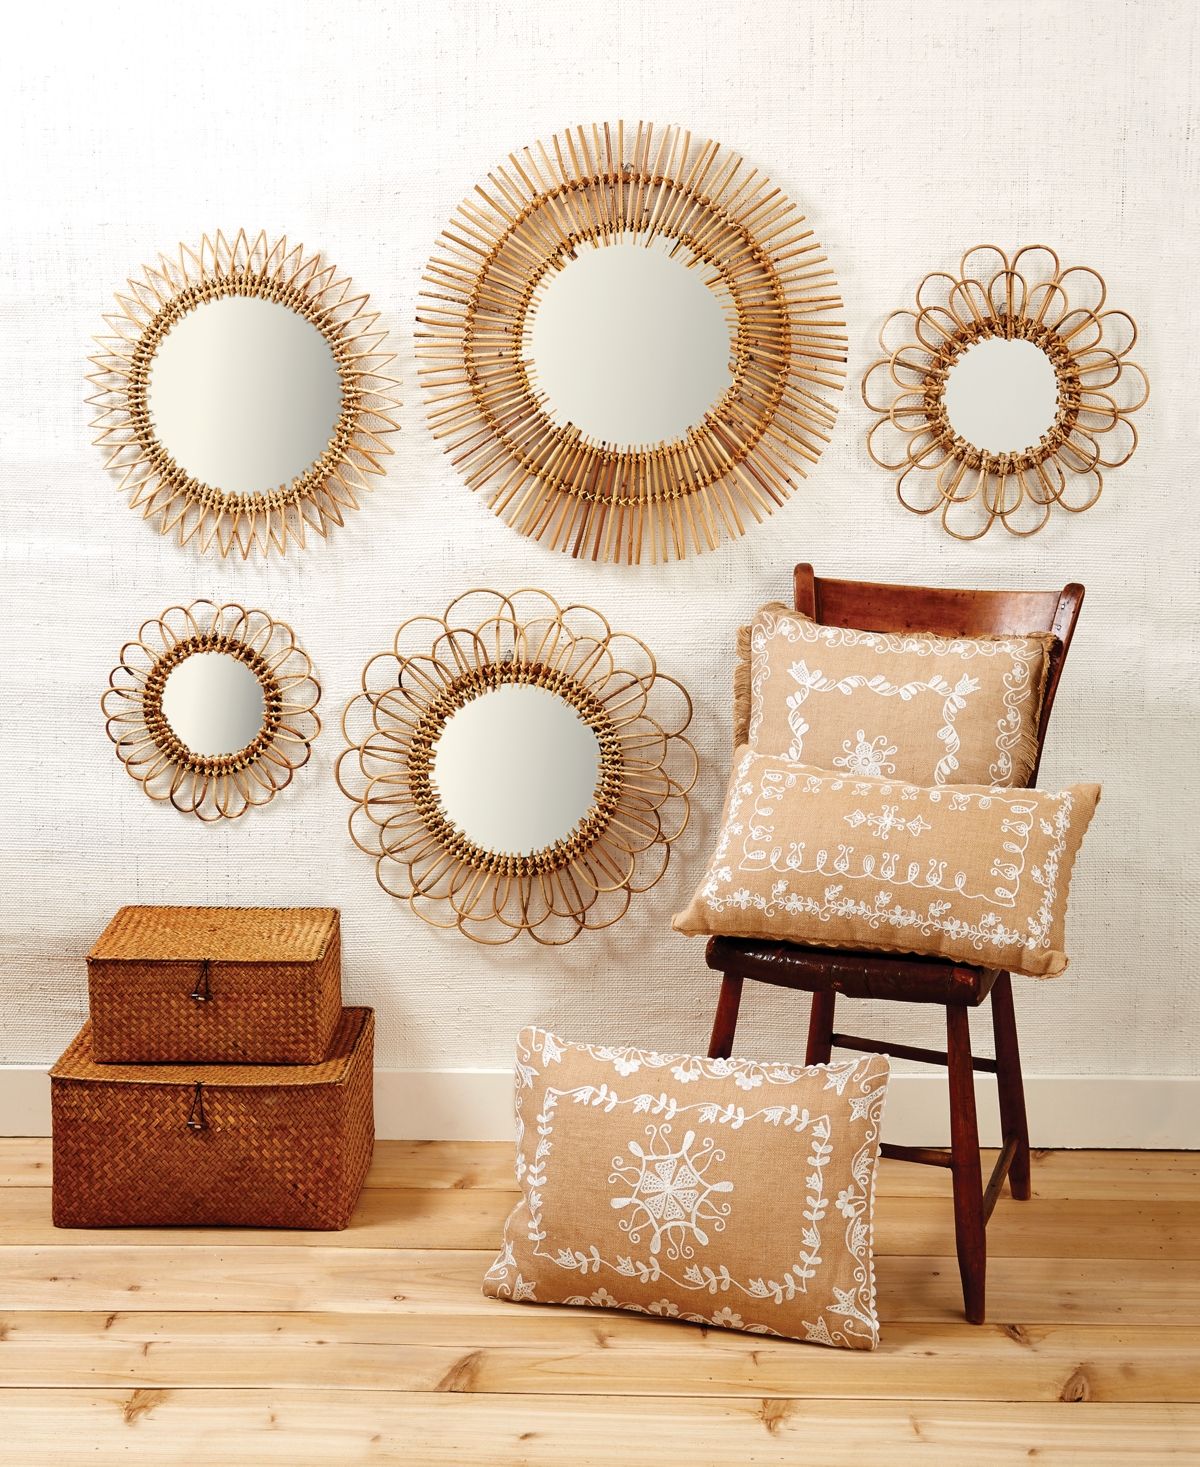 Two's Company Handcrafted Natural Rattan Wall Mirrors, Set of 5 | Macys (US)